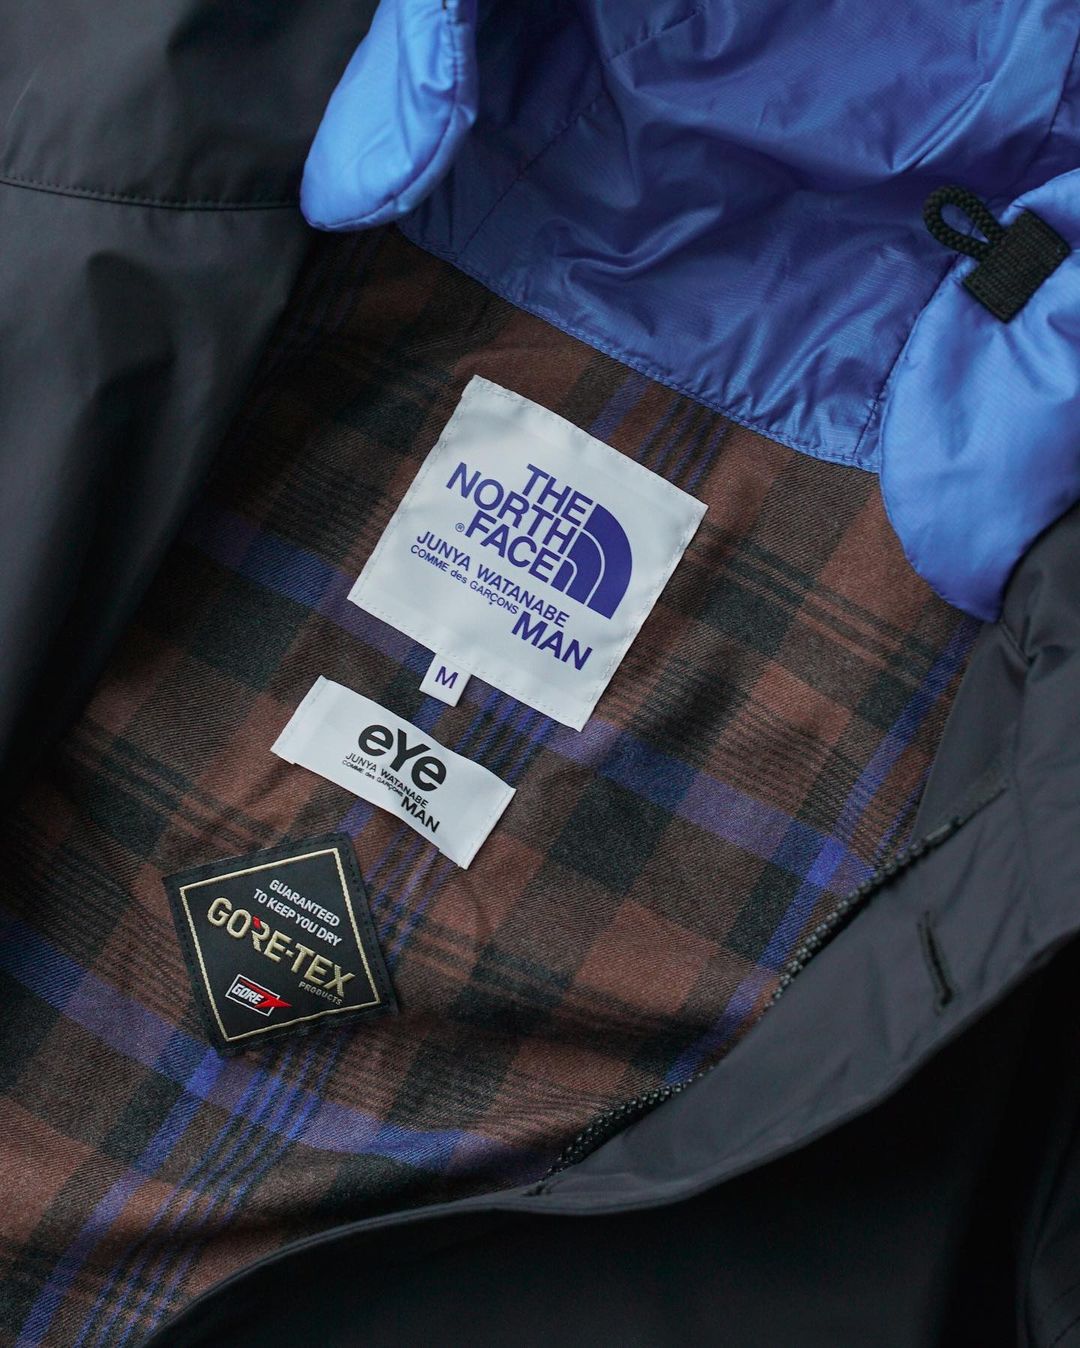 THE NORTH FACE × COMME des GARCONS JUNYA WATANABE MAN 2021 F/W ...